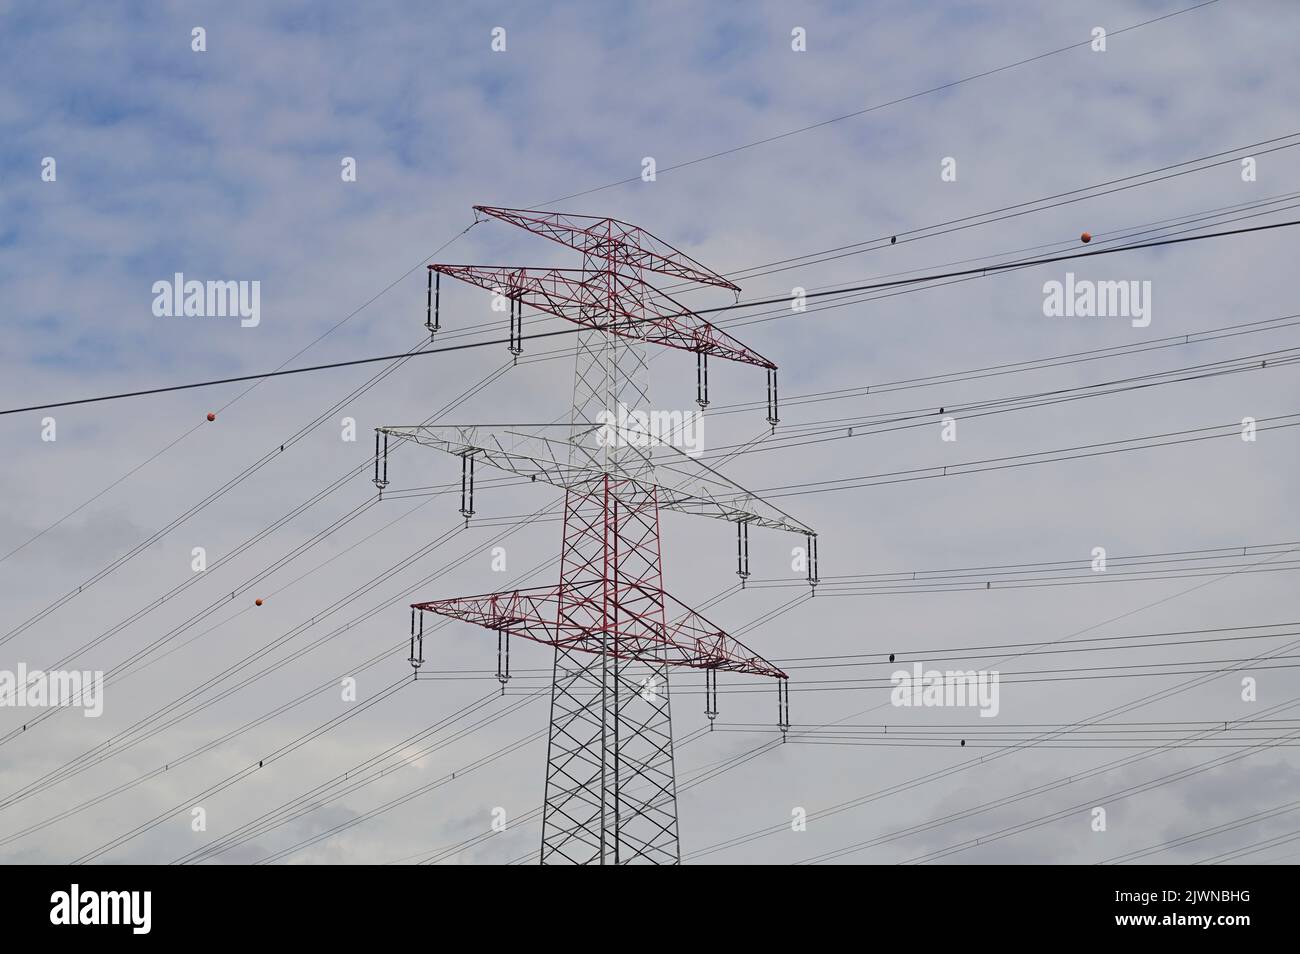 Steel lattice mast for the suspension of an overhead electrical line Stock Photo